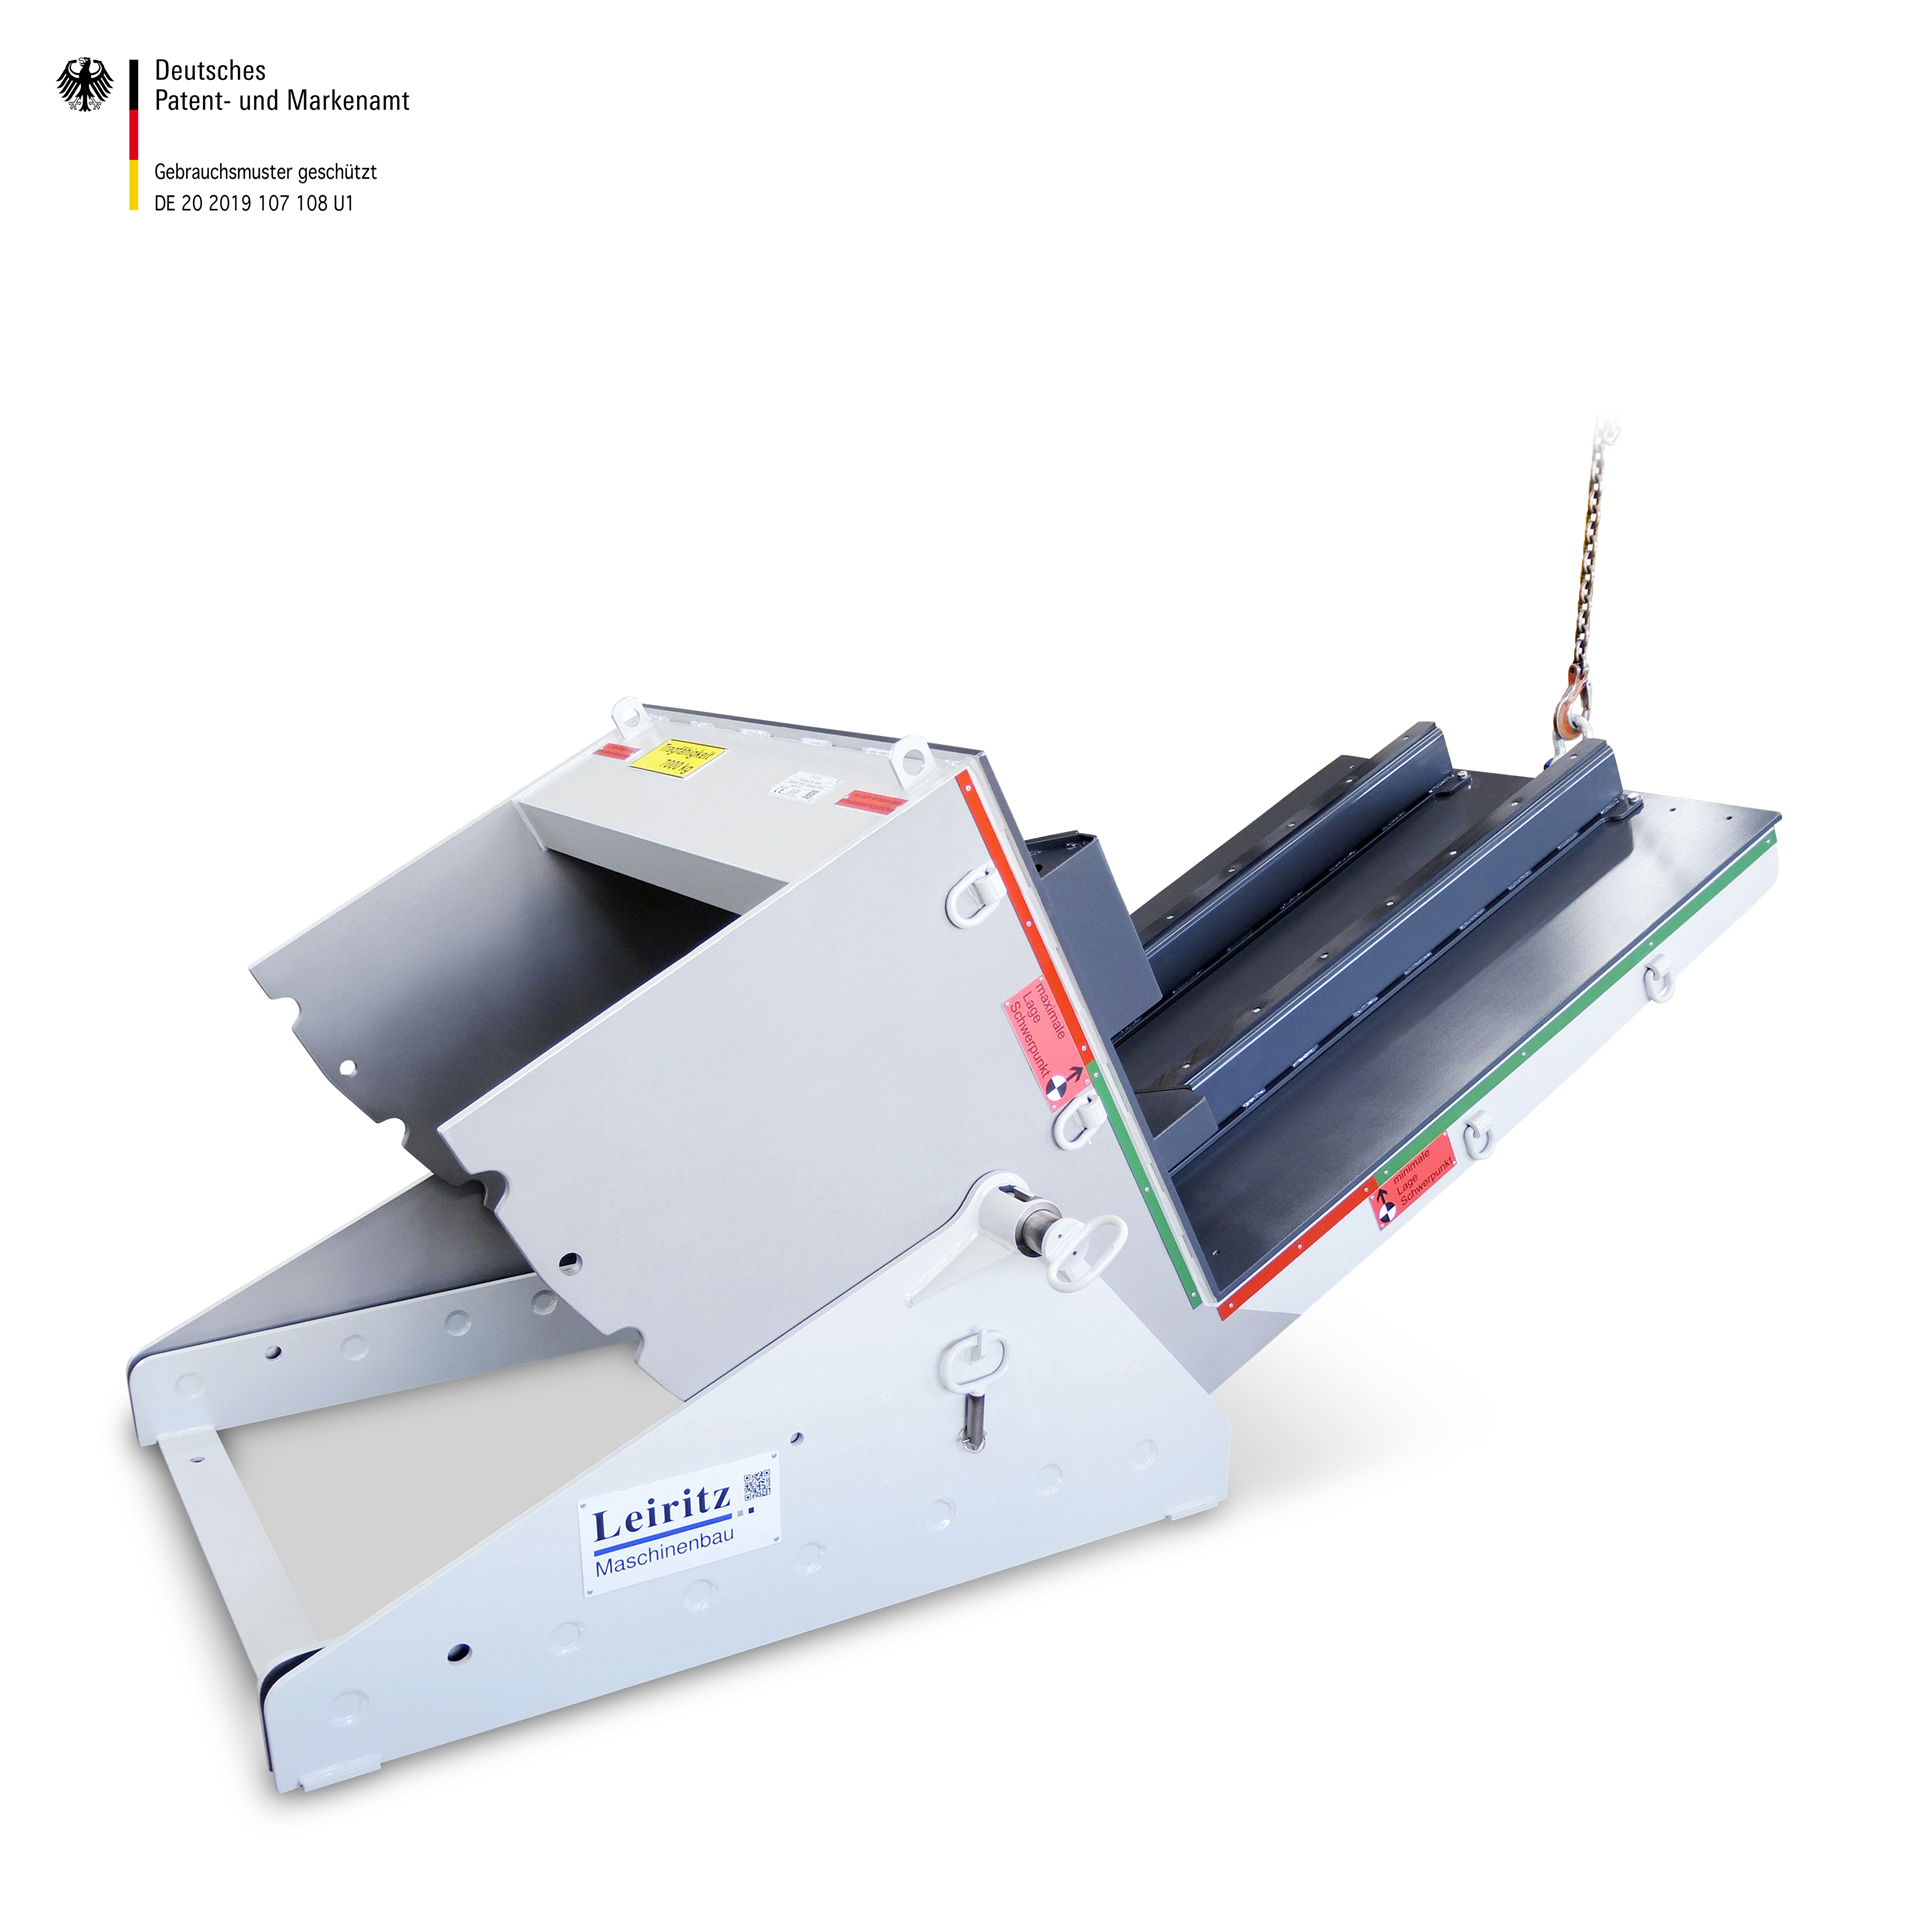 Coil Rotator products directly from the manufacturer Leiritz Maschinenbau.